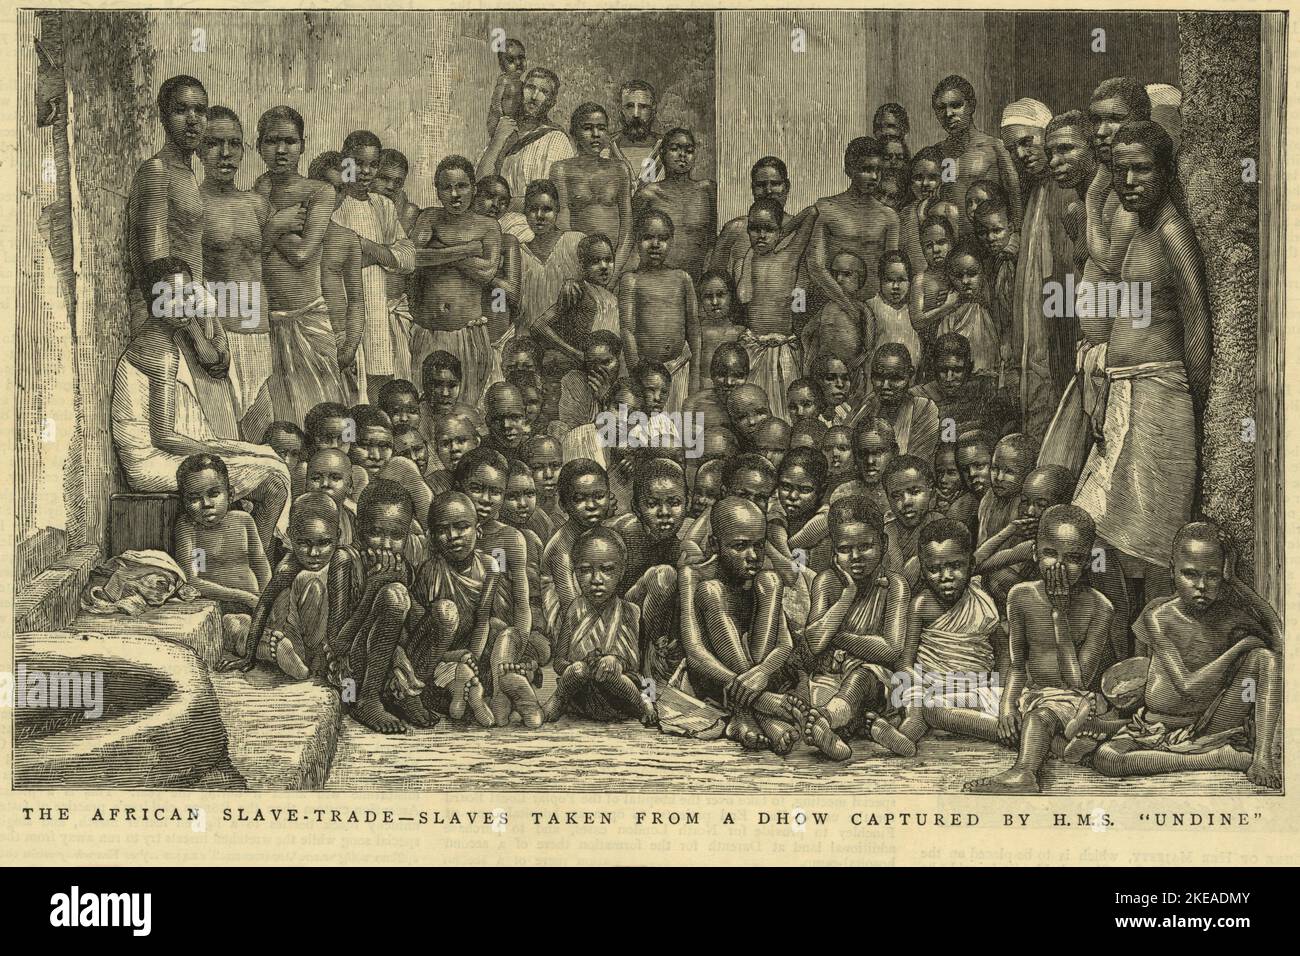 Vintage illustration dated June 7 1884 entitled The African Slave Trade - slaves taken from an Arab dhow captured by HMS Undine. It shows two British sailors posing with African men women and children rescued by the Royal Navy anti slavery patrols in East Africa during the 1880s.  Illustrated in The Graphic. London, June 7, 1884 Stock Photo